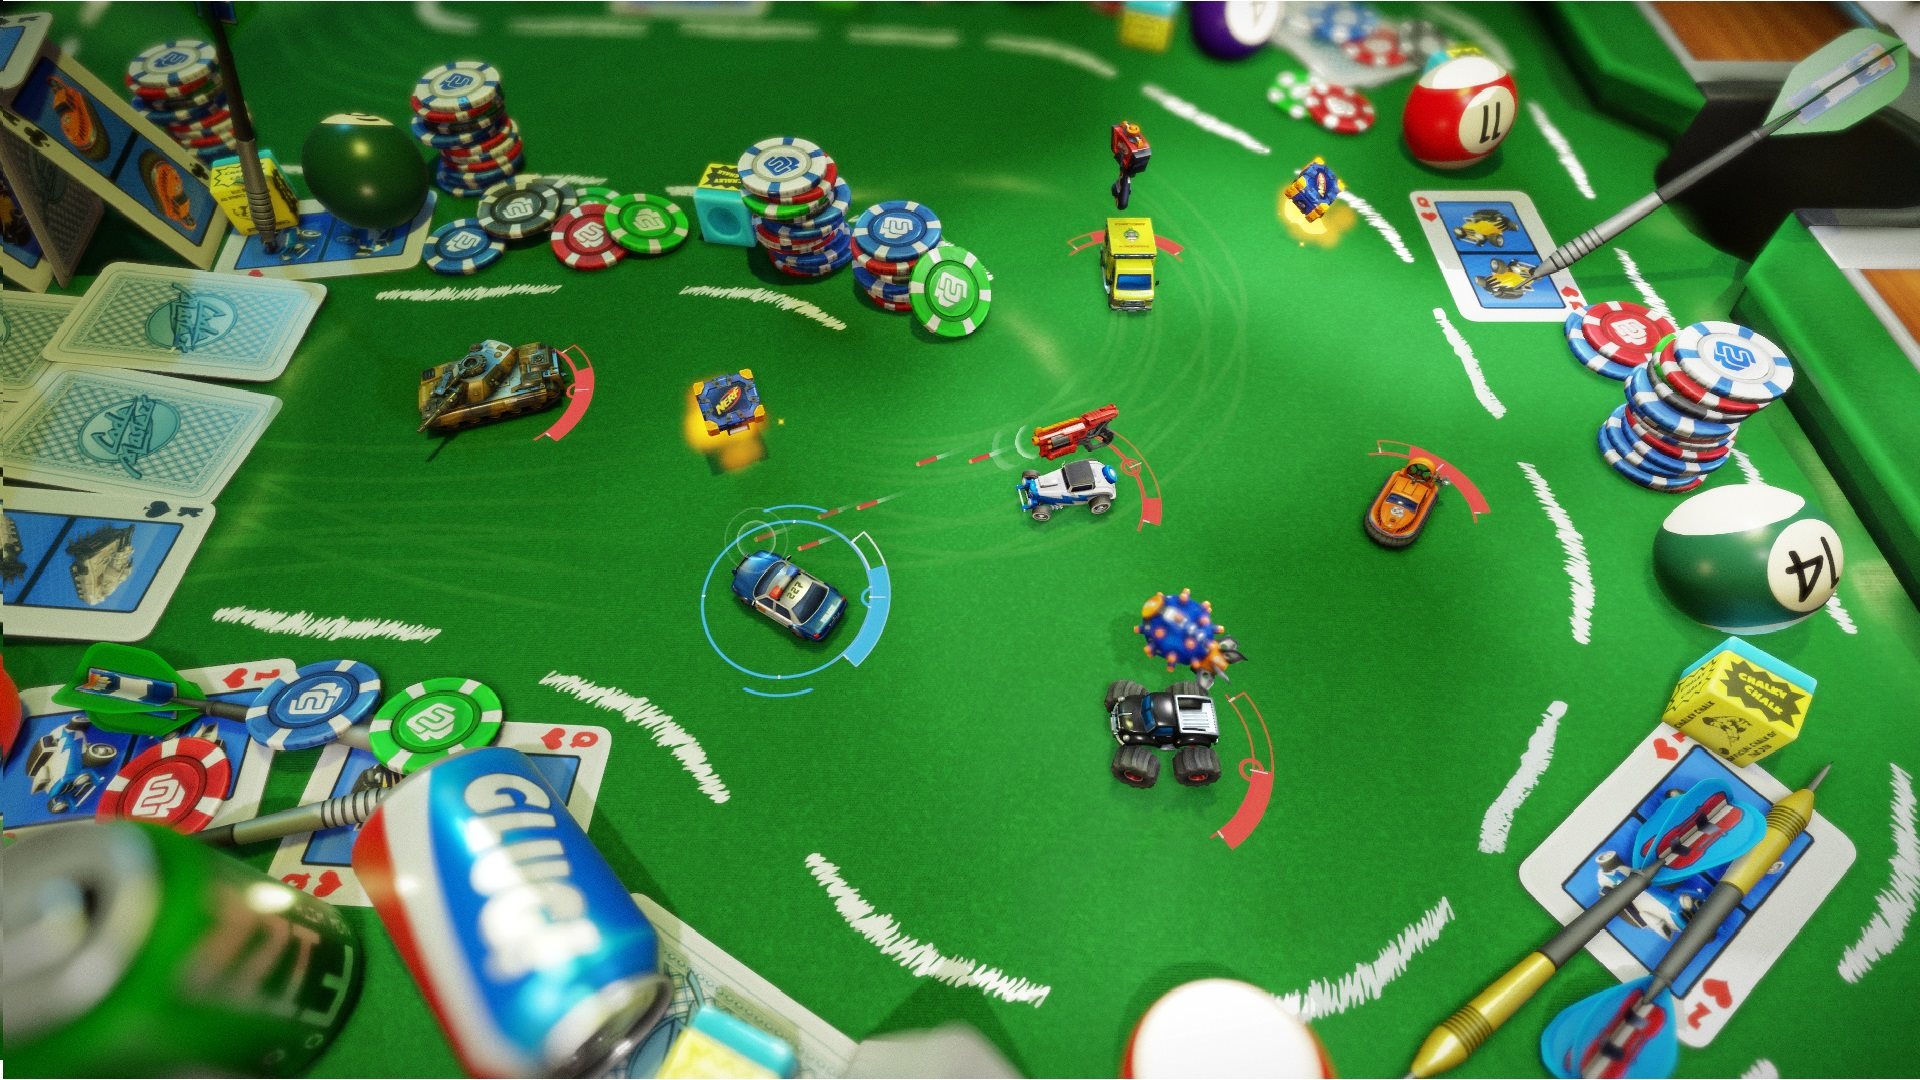 micro machines v4 pc torrent download